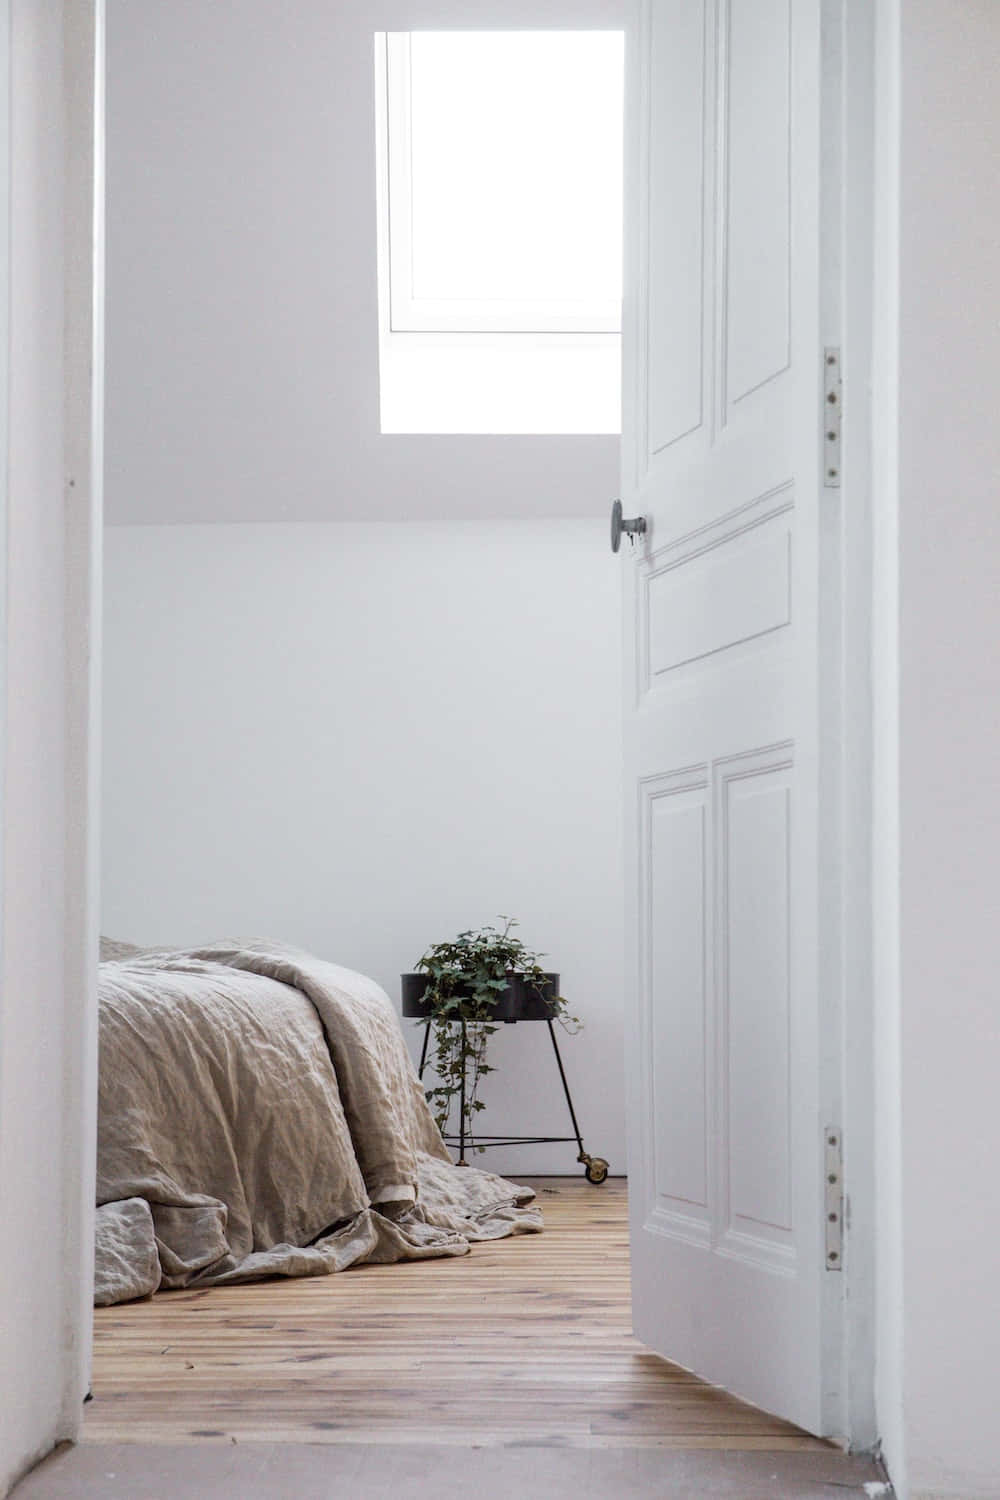 A White Door With A Skylight